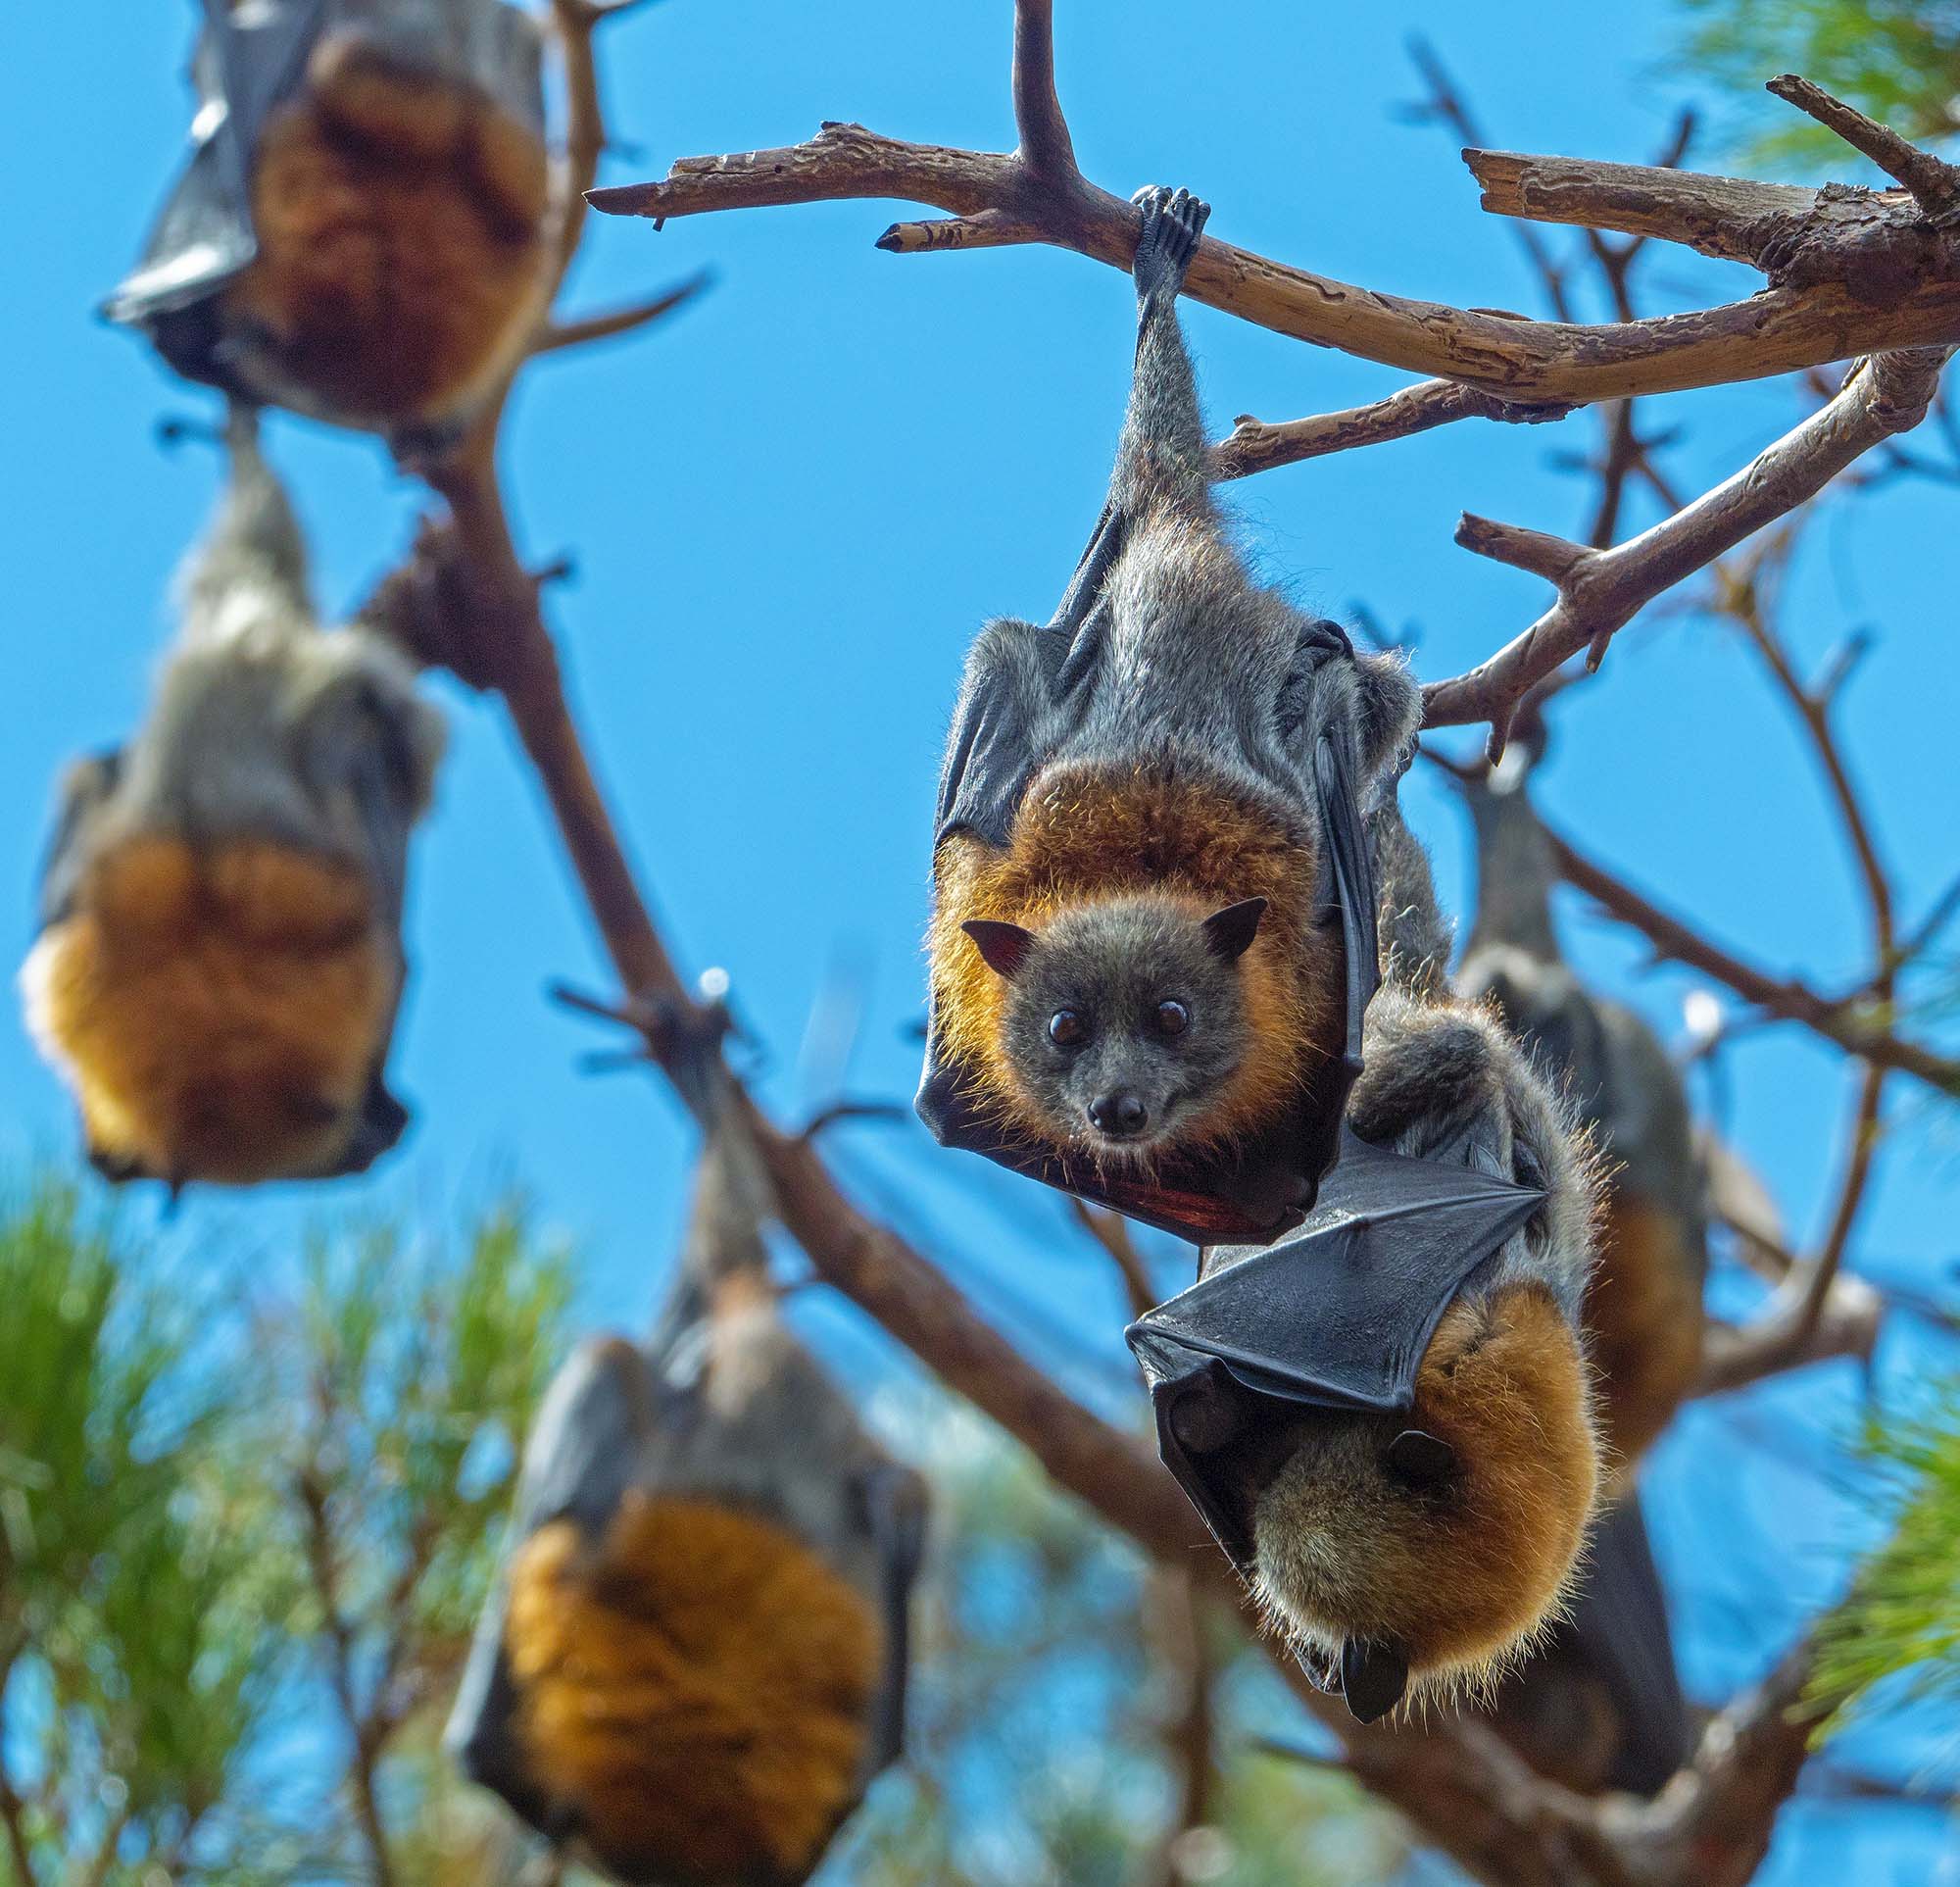 A group of bats hanging on a tree with blue sky in the background. One is looking at the camera